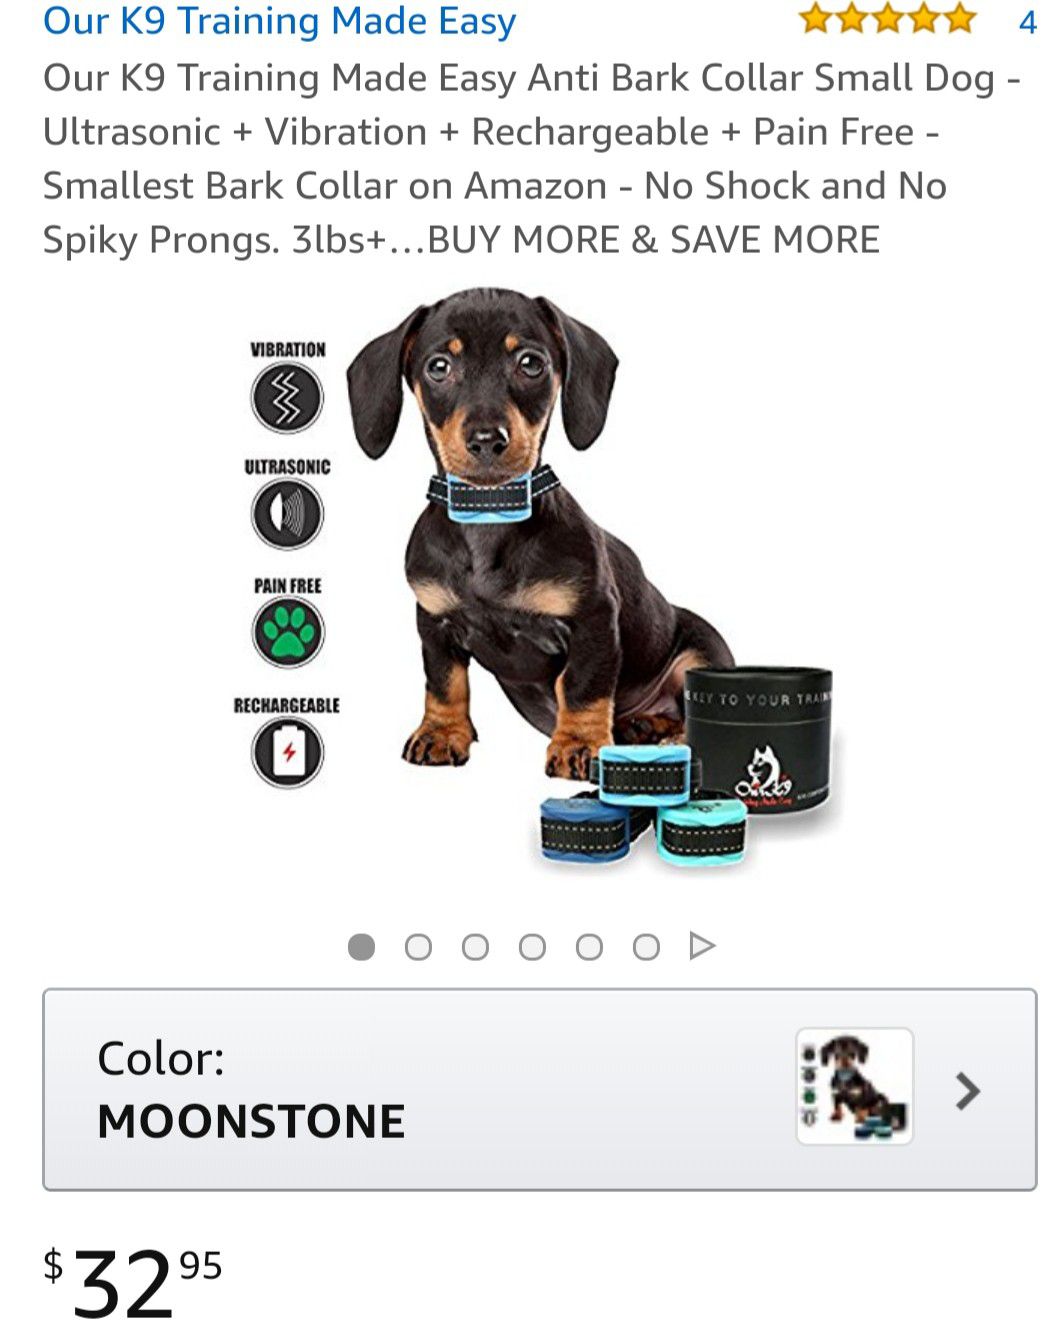 Anti bark collar for small pets